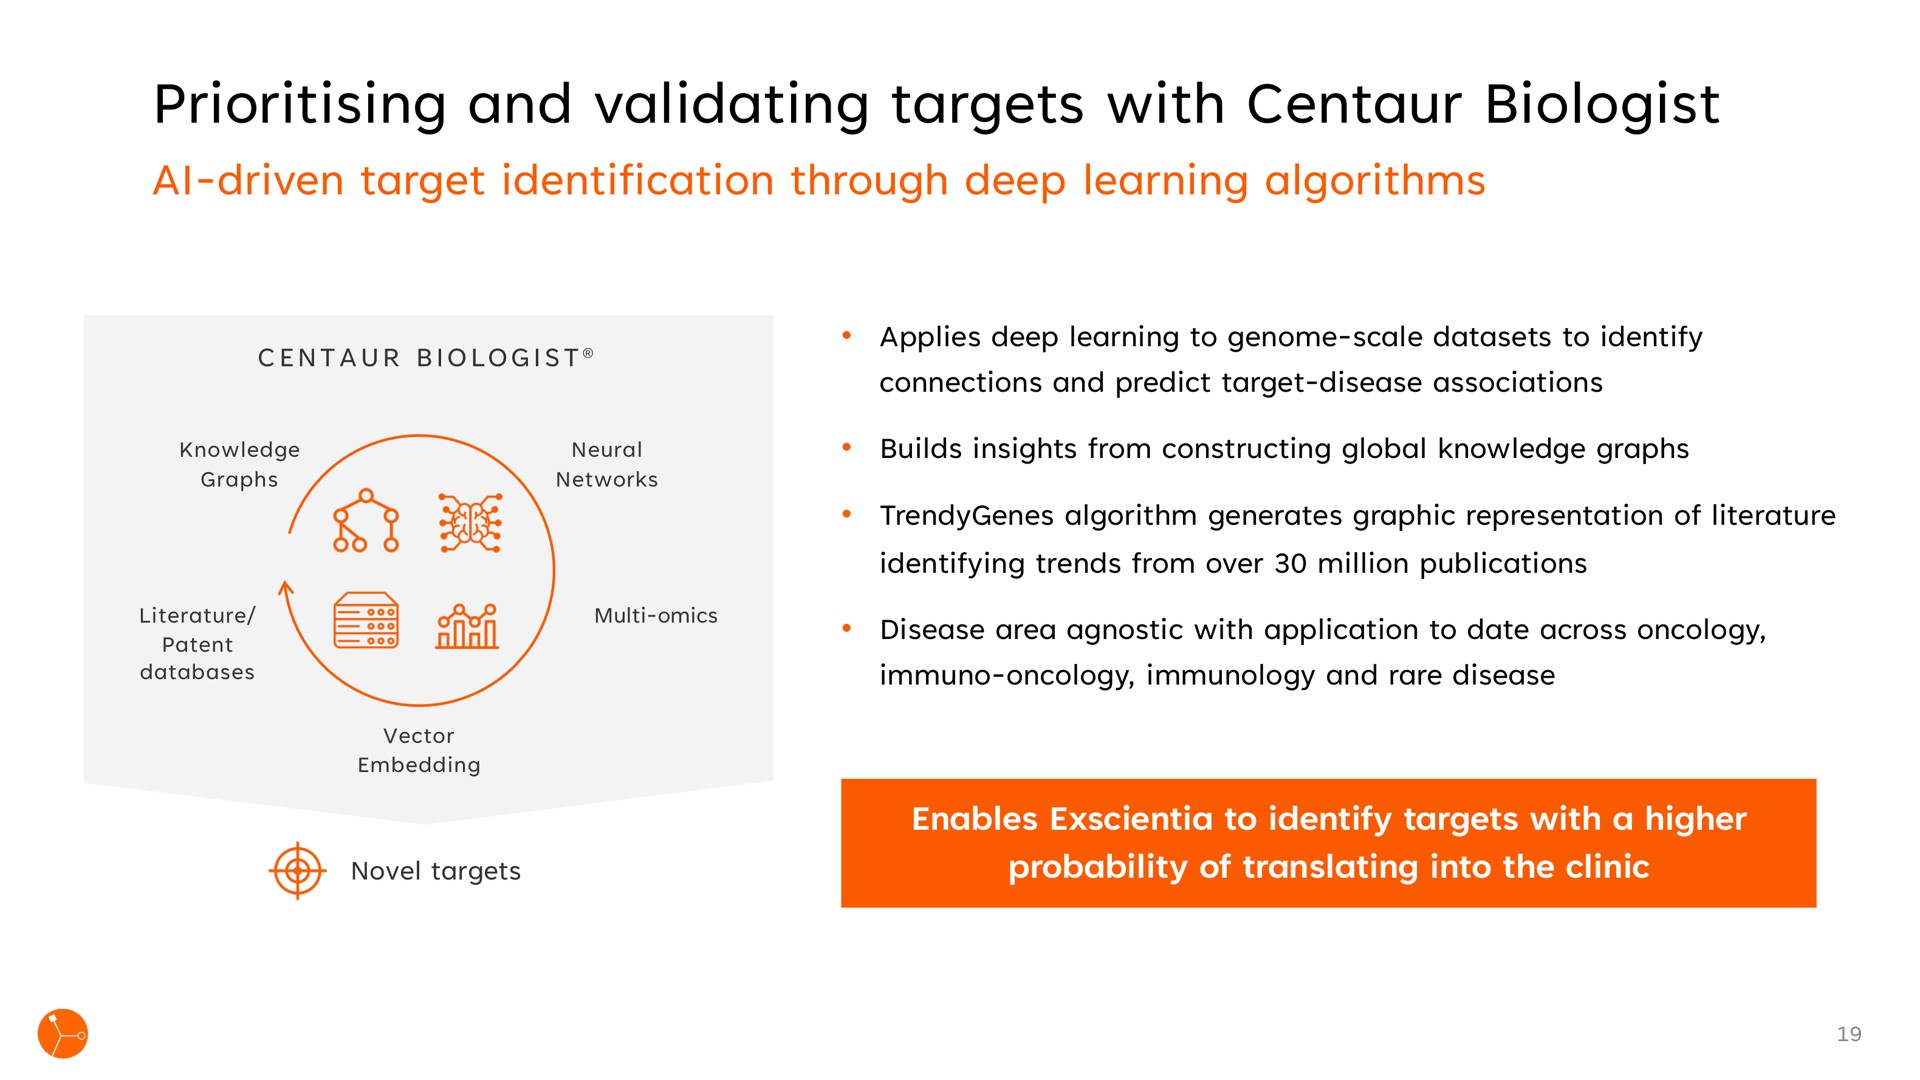 and validating targets with centaur biologist | Exscientia